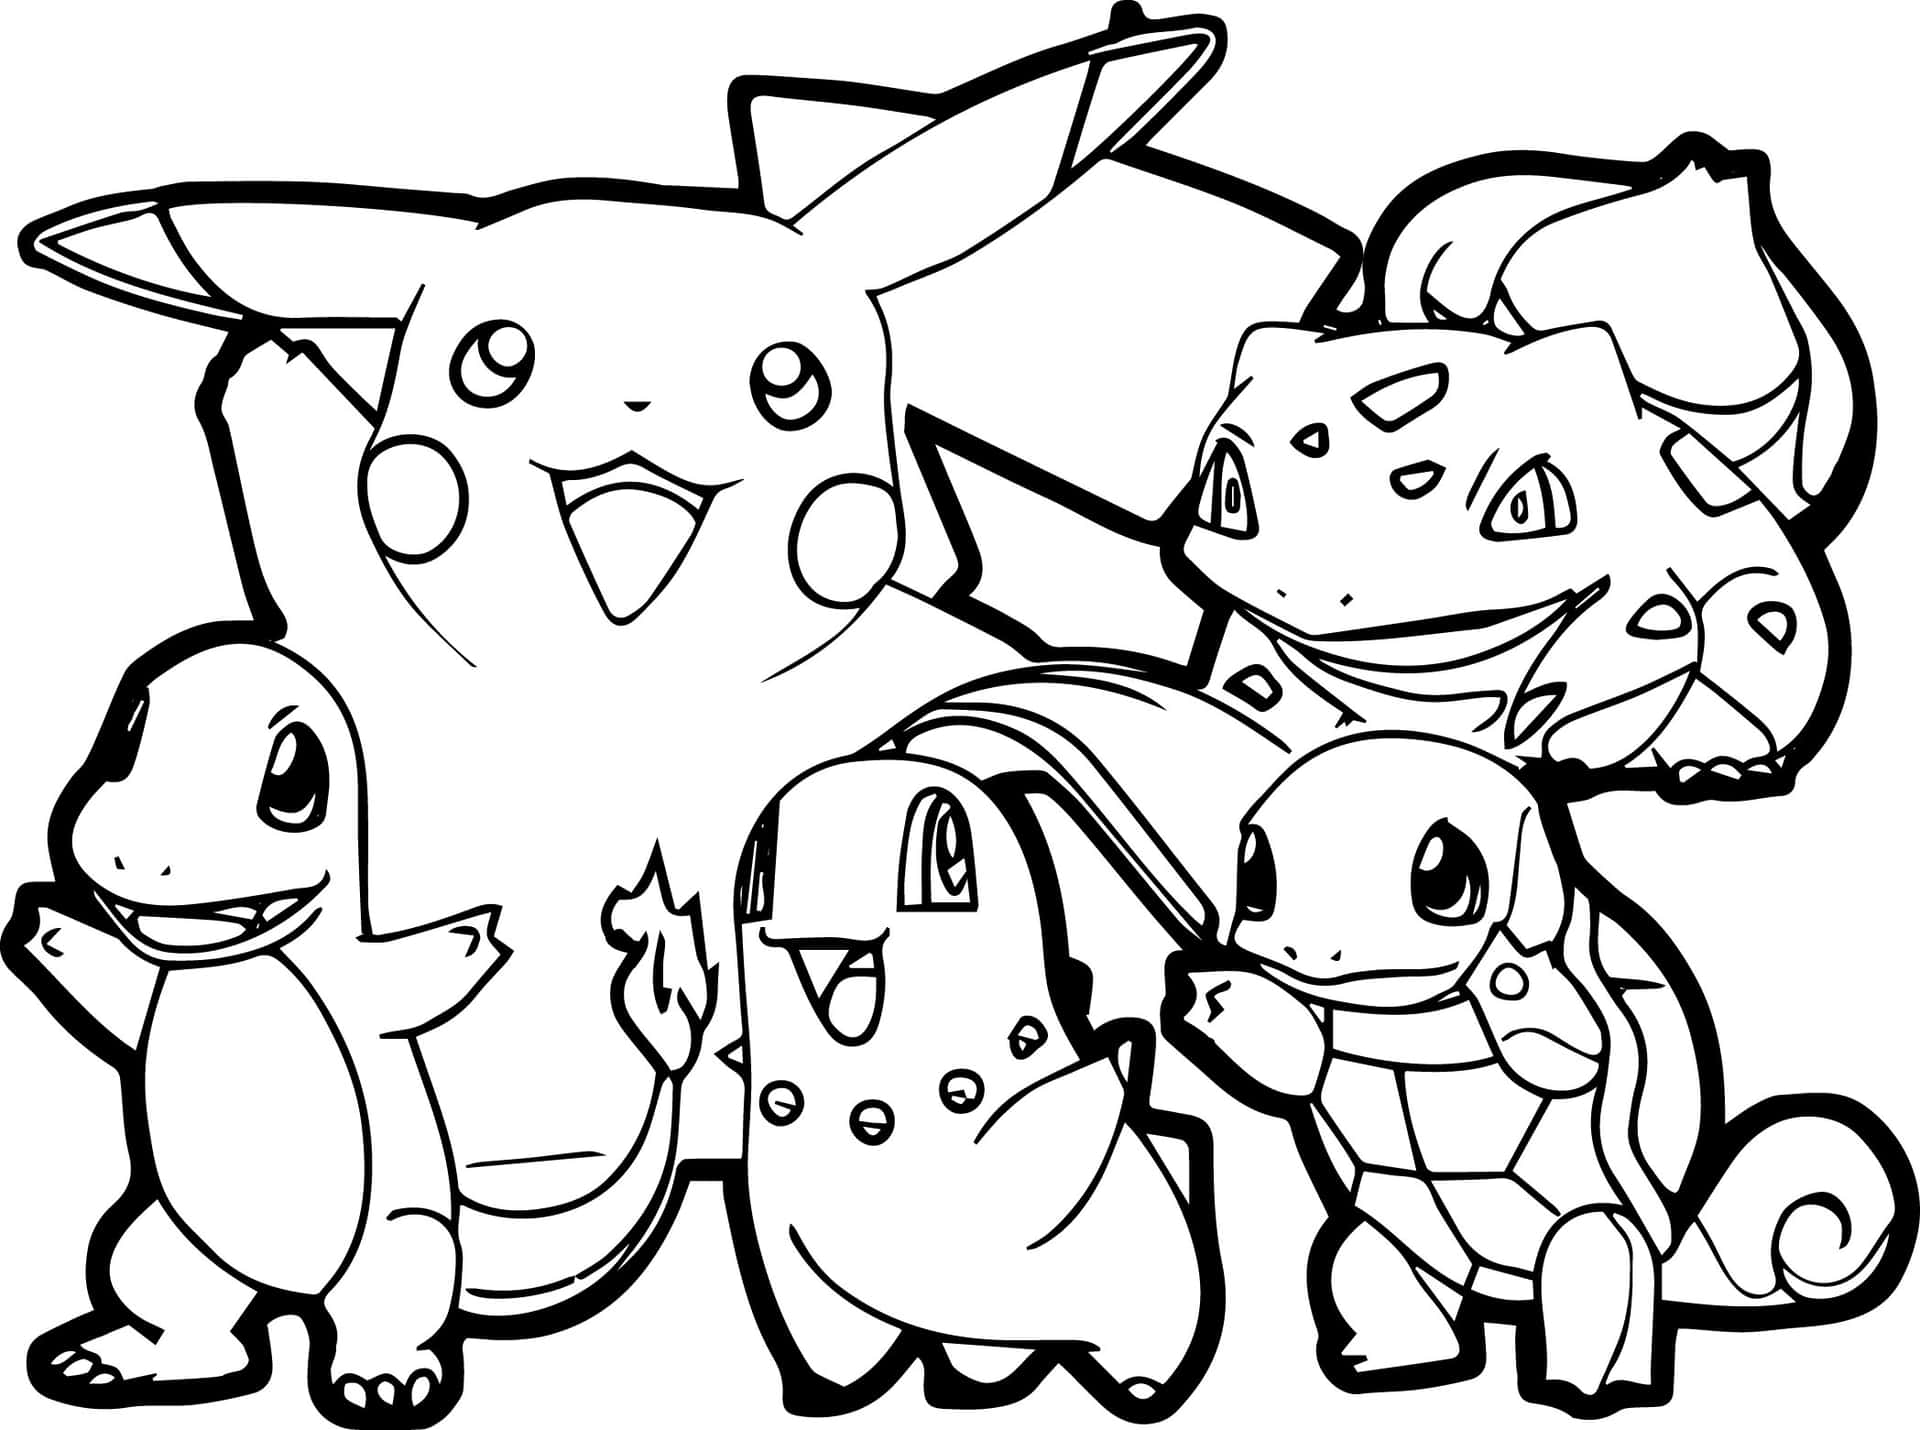 Pokemon Coloring Pages Ash and Friends Colouring book fun for kids